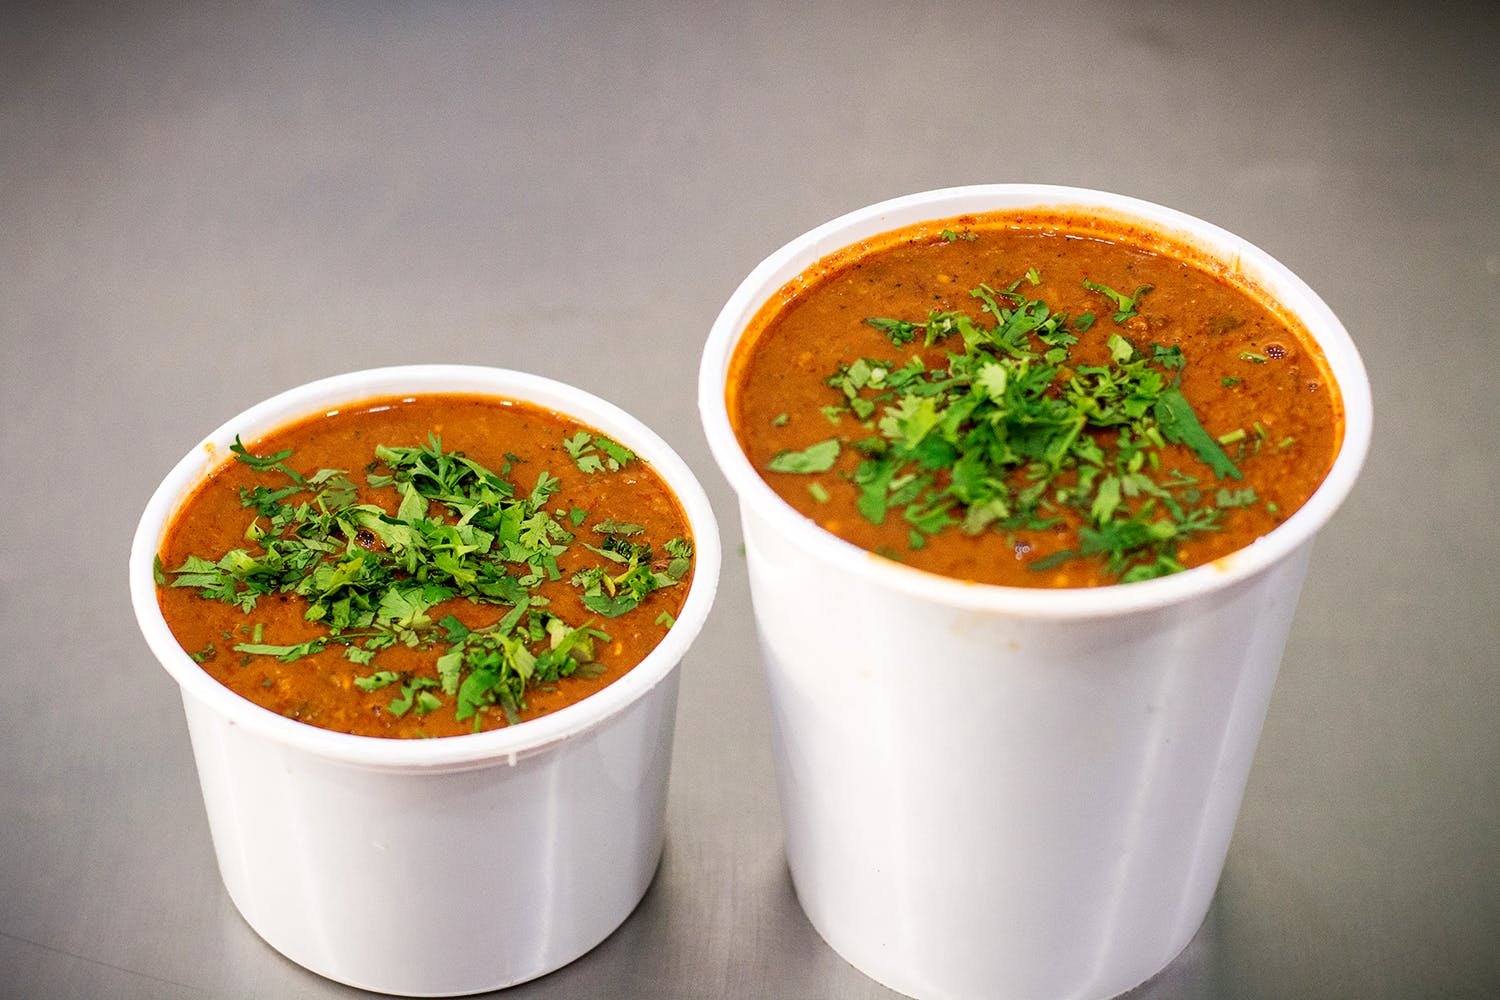 Dish,Food,Cuisine,Ingredient,Carrot and red lentil soup,Soup,Indian cuisine,Vegetarian food,Gazpacho,Produce